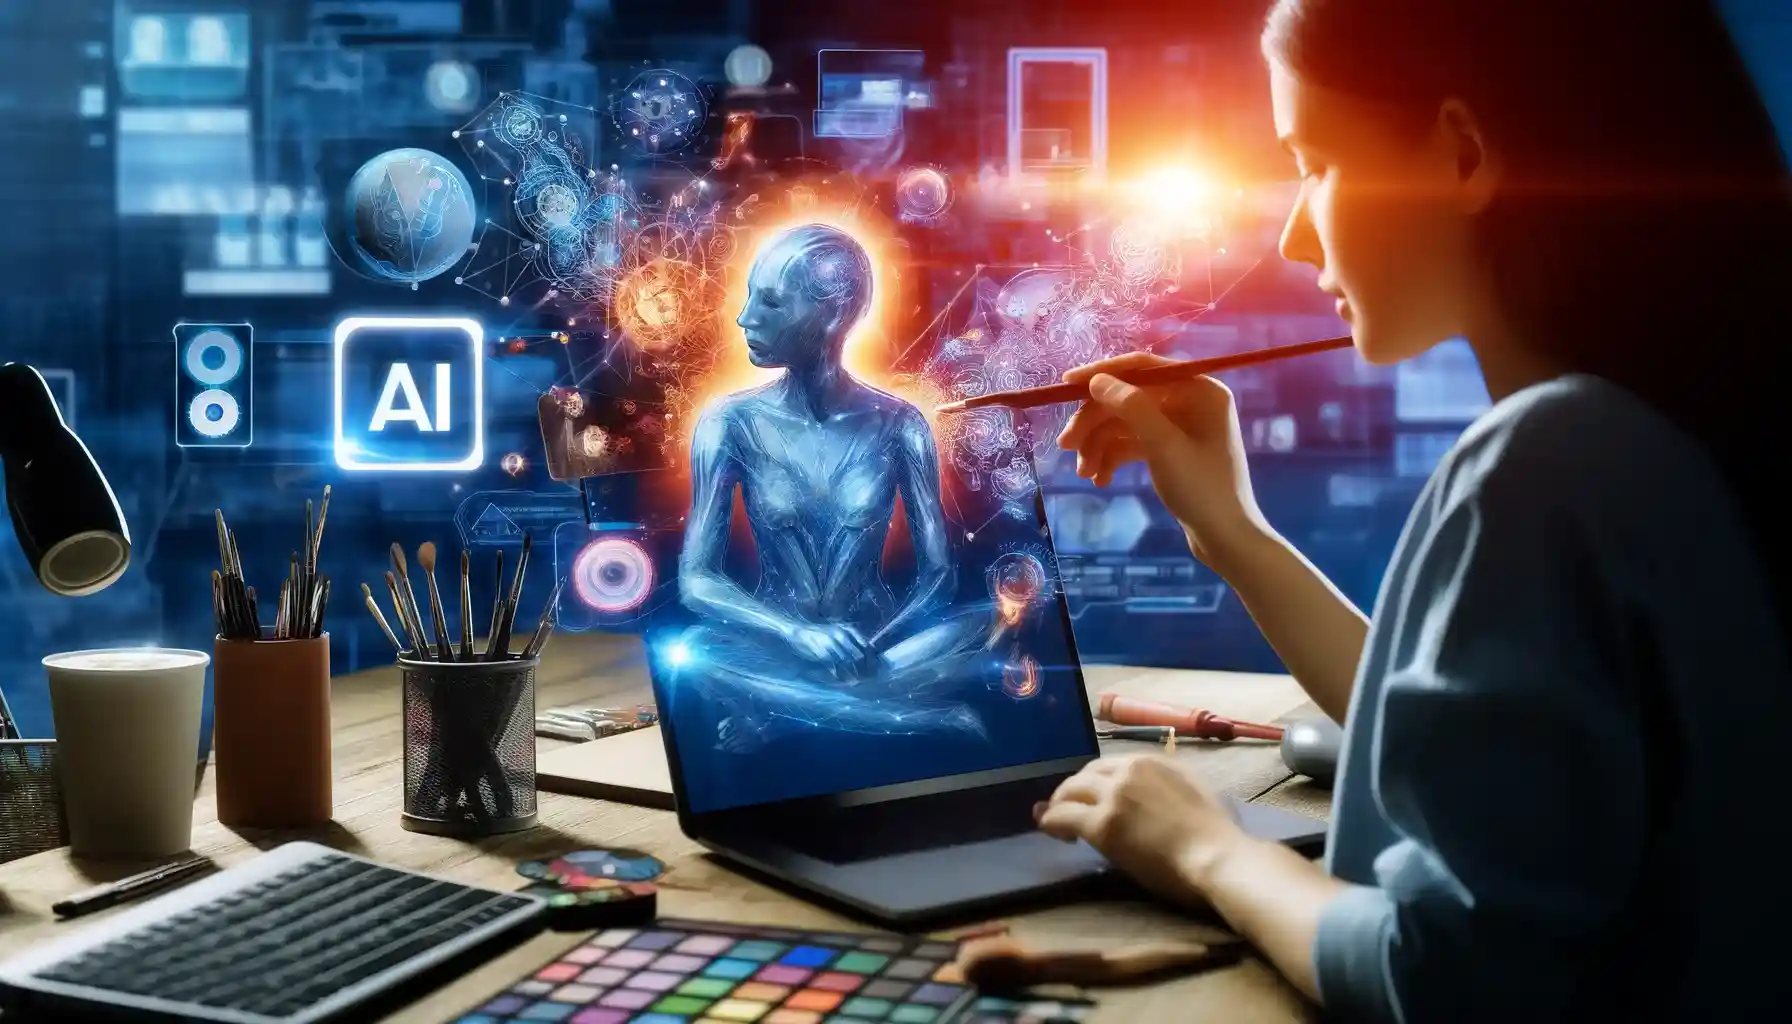 A digital artist and an AI symbol working collaboratively on a laptop, creating visual content.